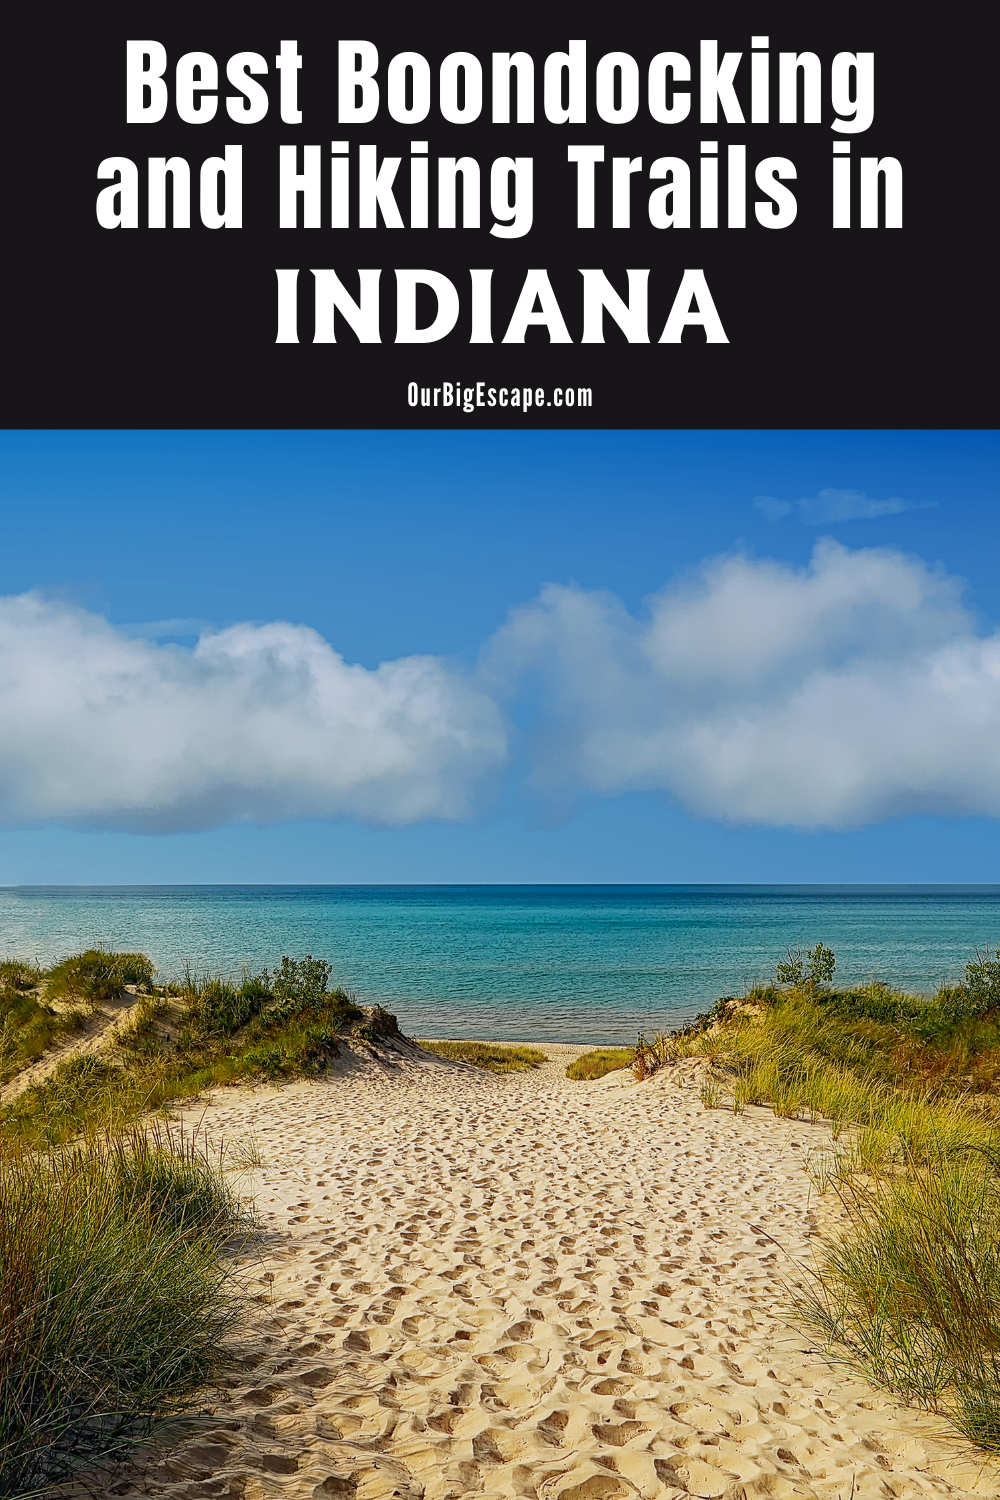 Best Boondocking and Hiking Trails in Indiana